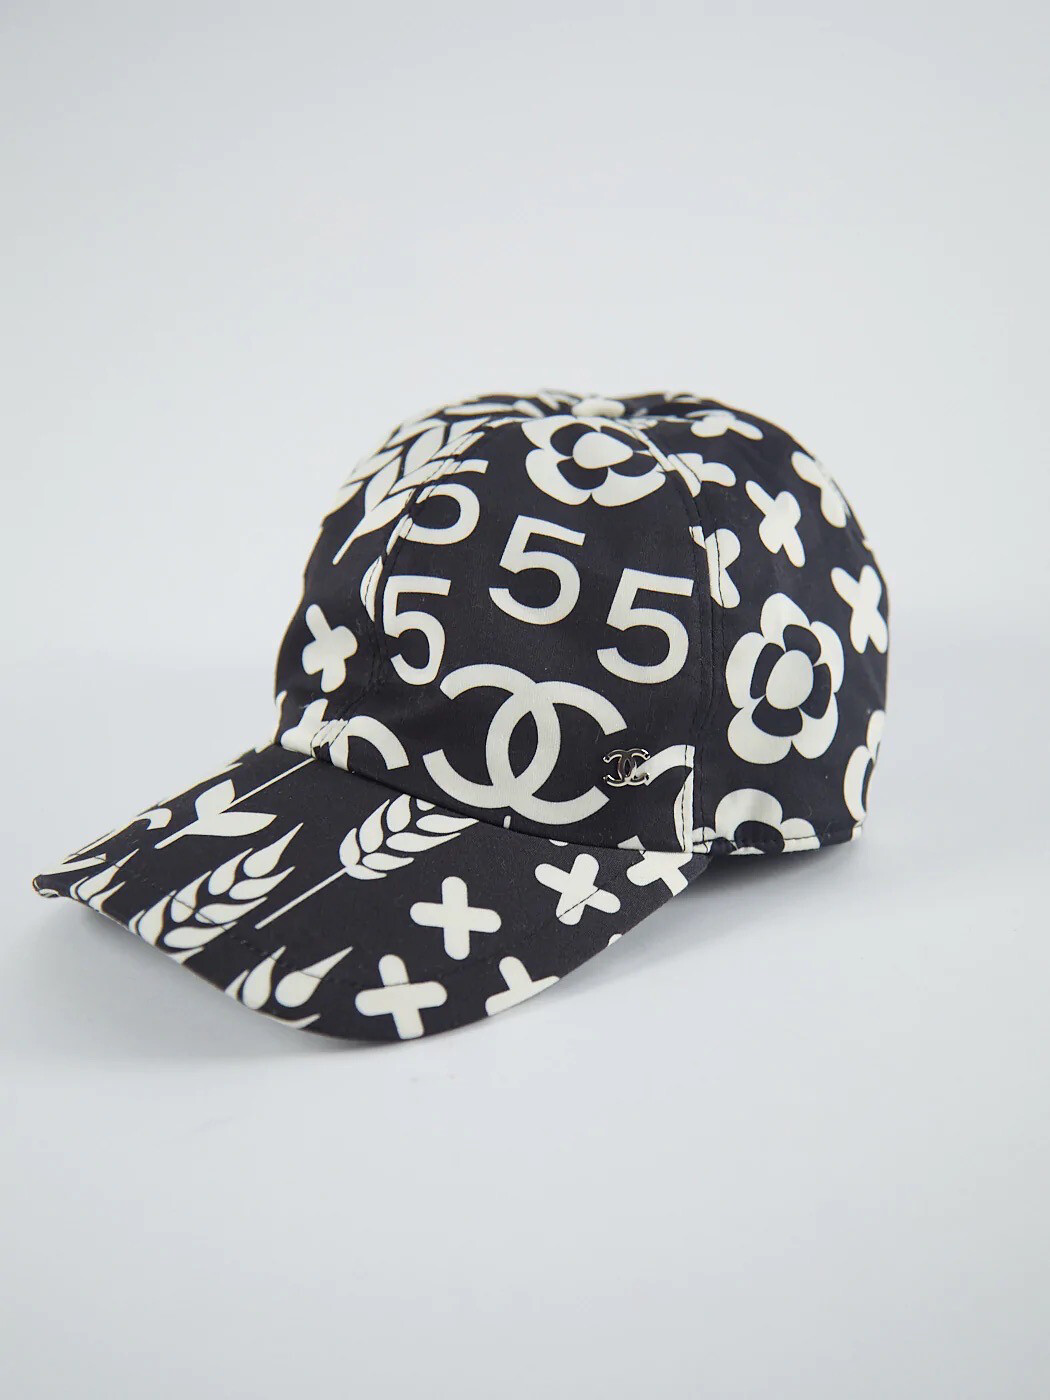 Chanel Baseball Hat, Black And White, New - No Box (Ships From London)